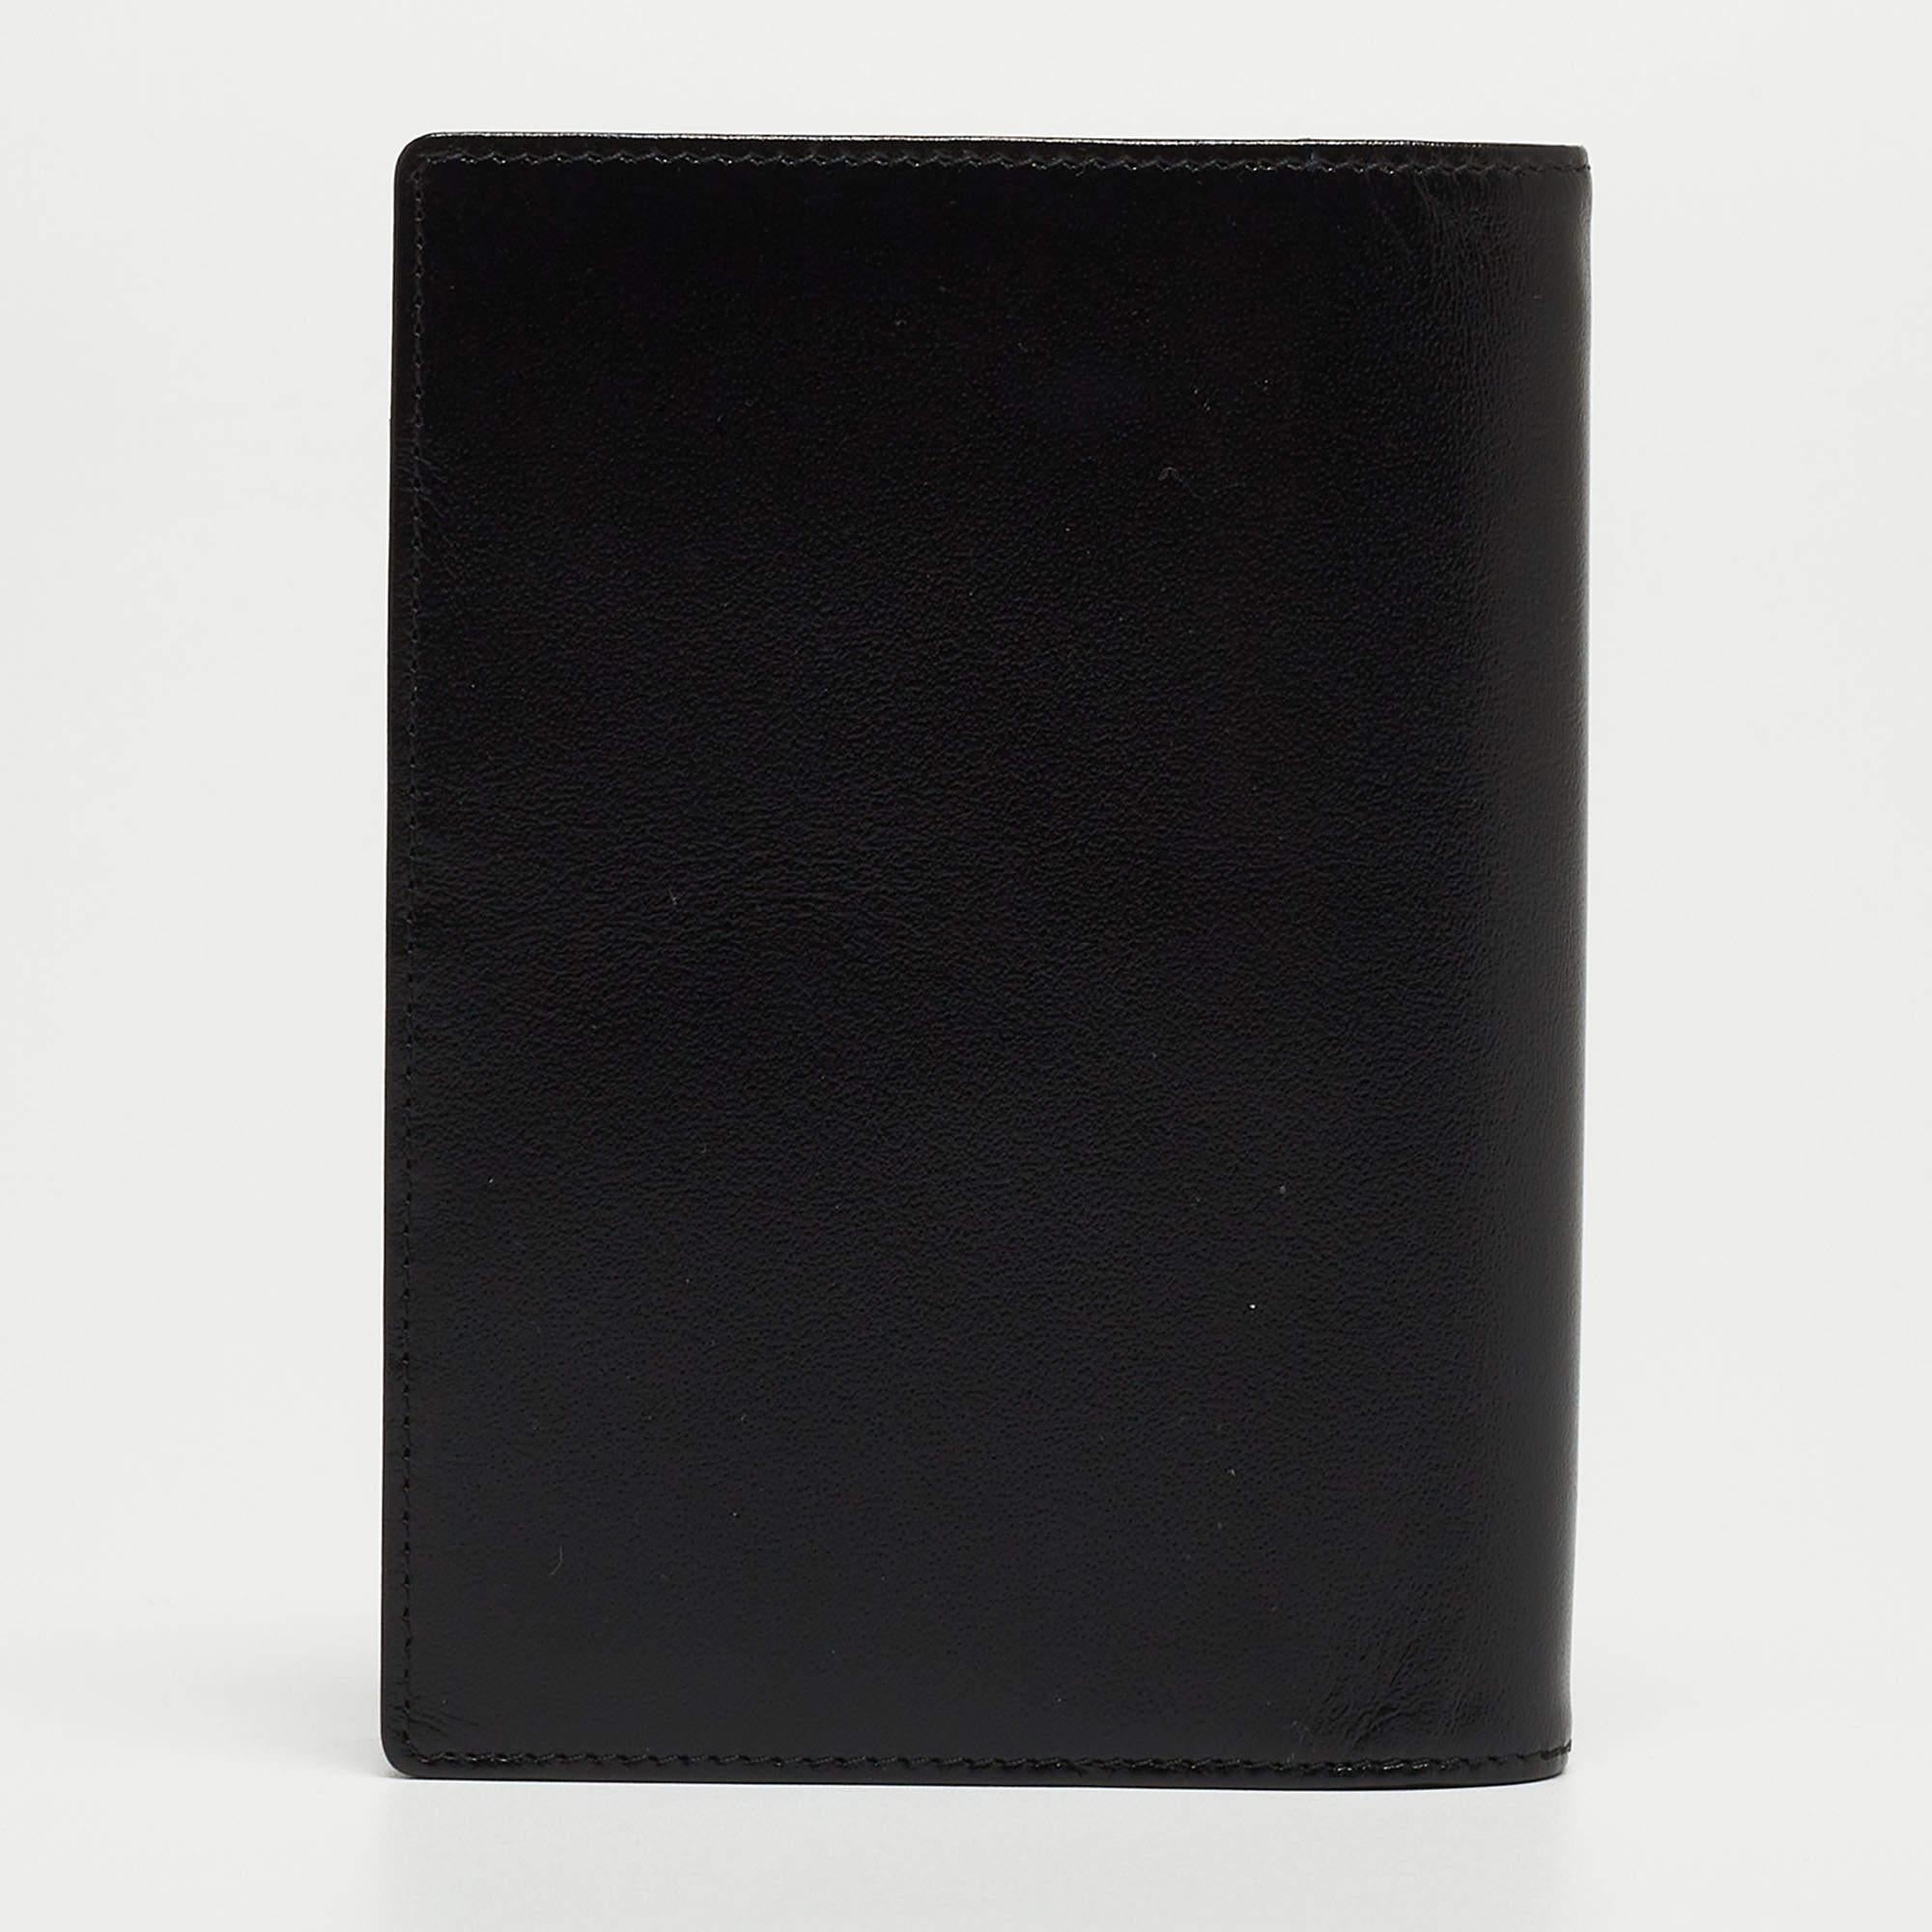 Montblanc's collection of exquisite, functional designs includes this Meisterstück pocket notebook. Made from black leather, the functional accessory brings a simple design of card slots and a notepad.

Includes: Original Box, Notebook

